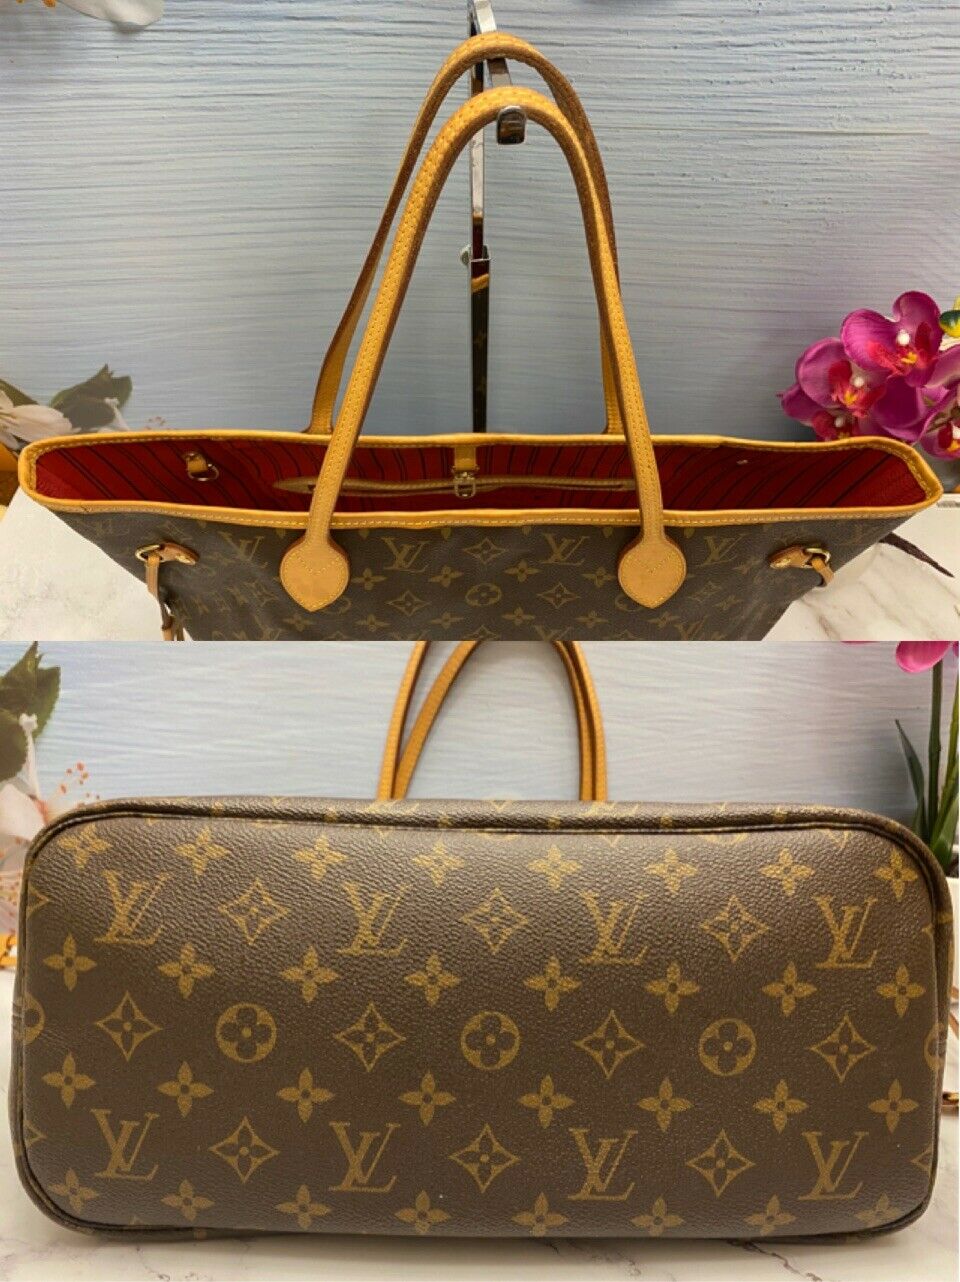 Louis Vuitton Ar2189 - For Sale on 1stDibs